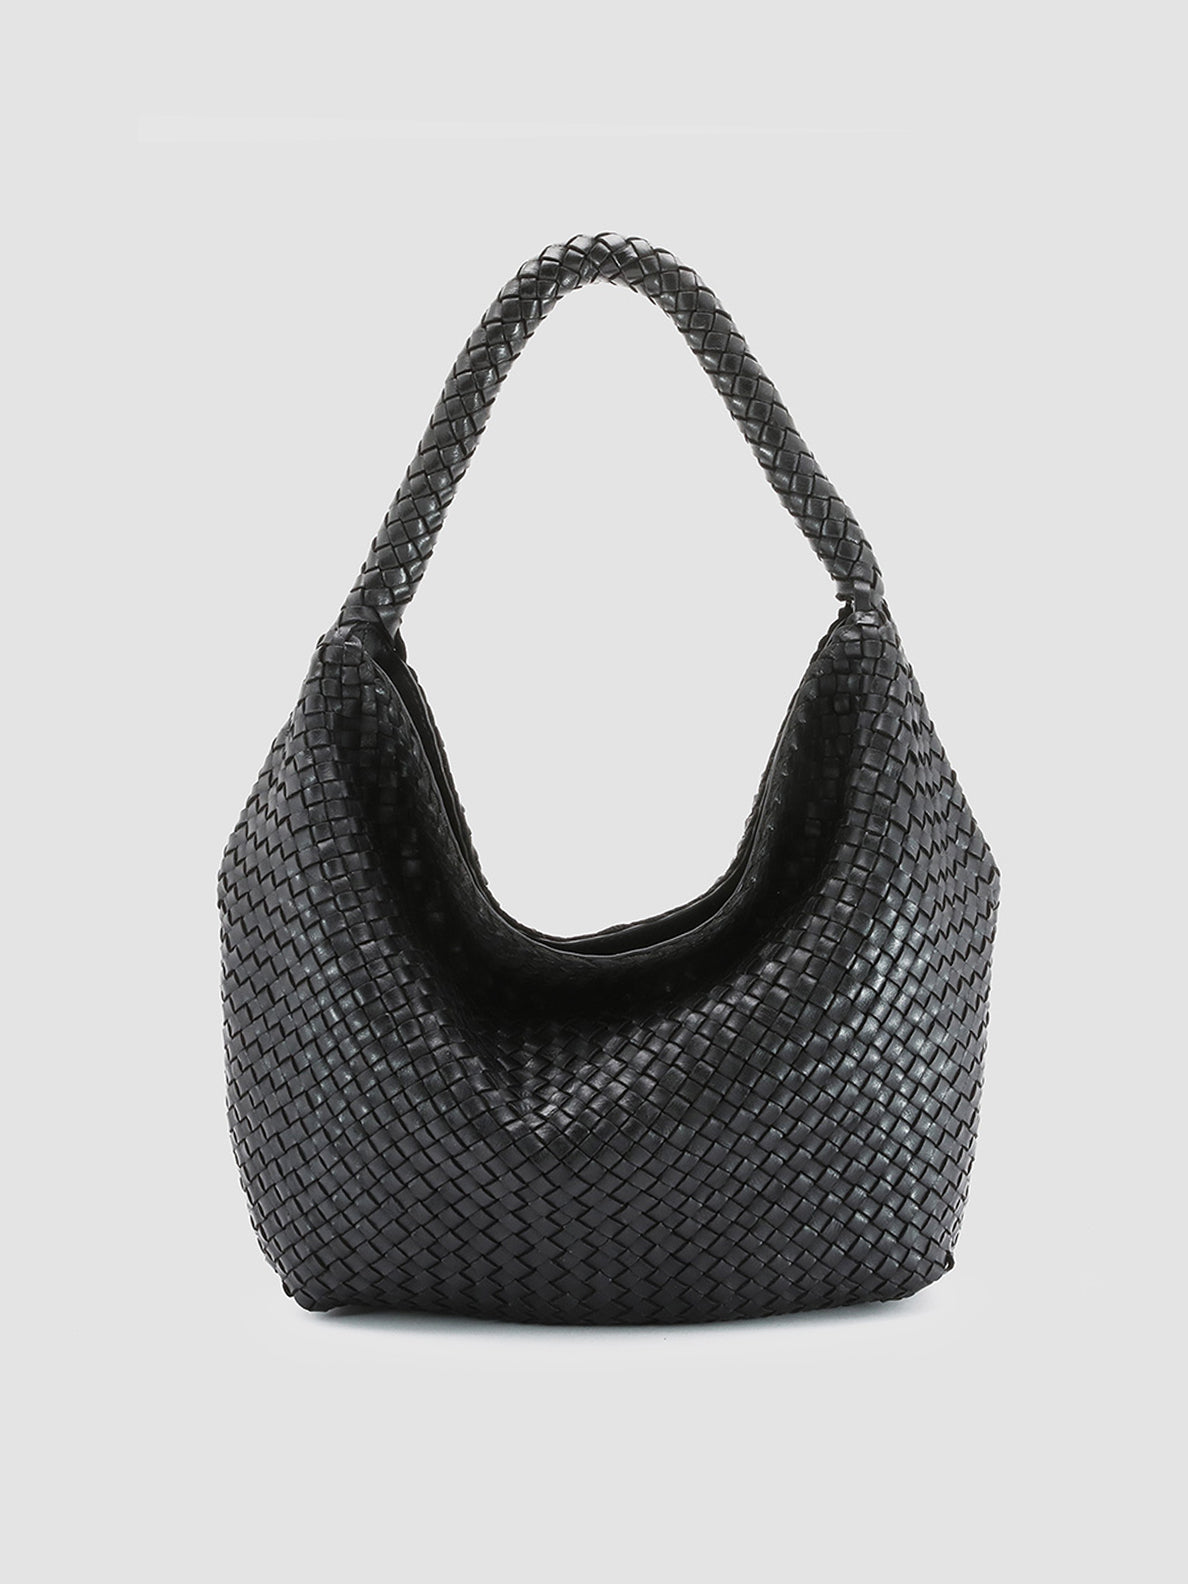 woven leather bag